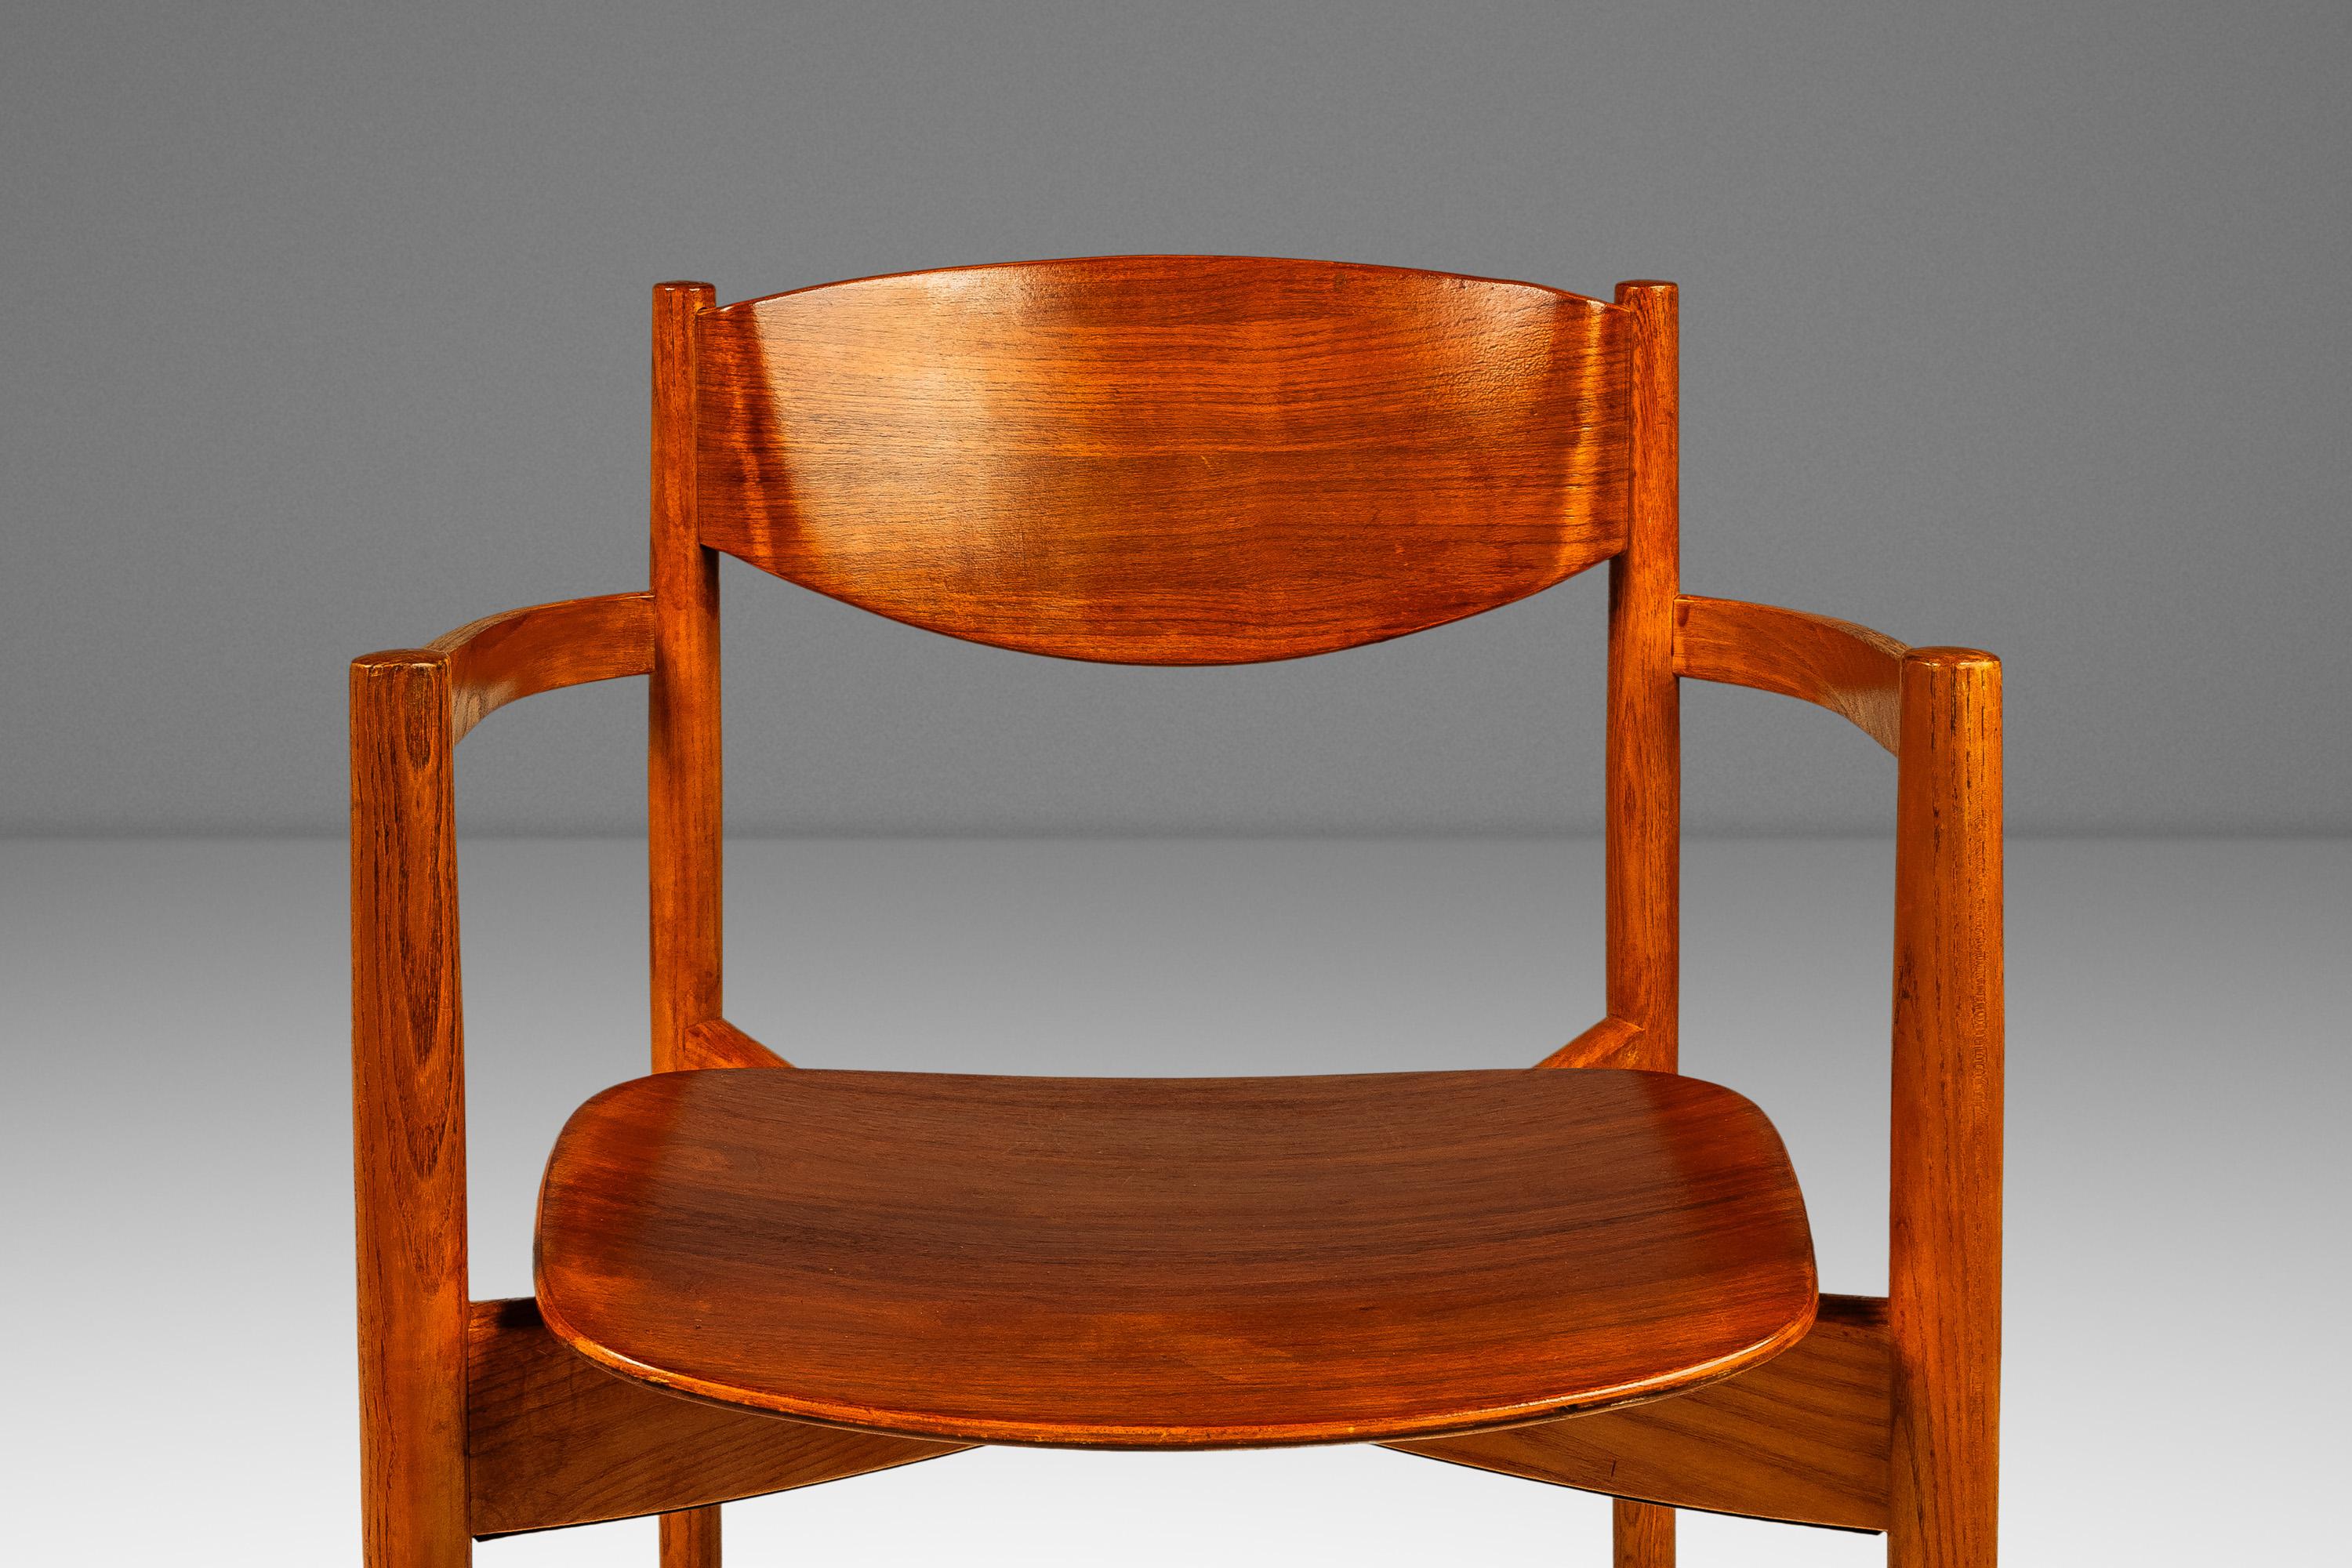 Set of 8 Mid-Century Stacking Chairs: Oak & Walnut, Jens Risom Design, USA, 1960 For Sale 7